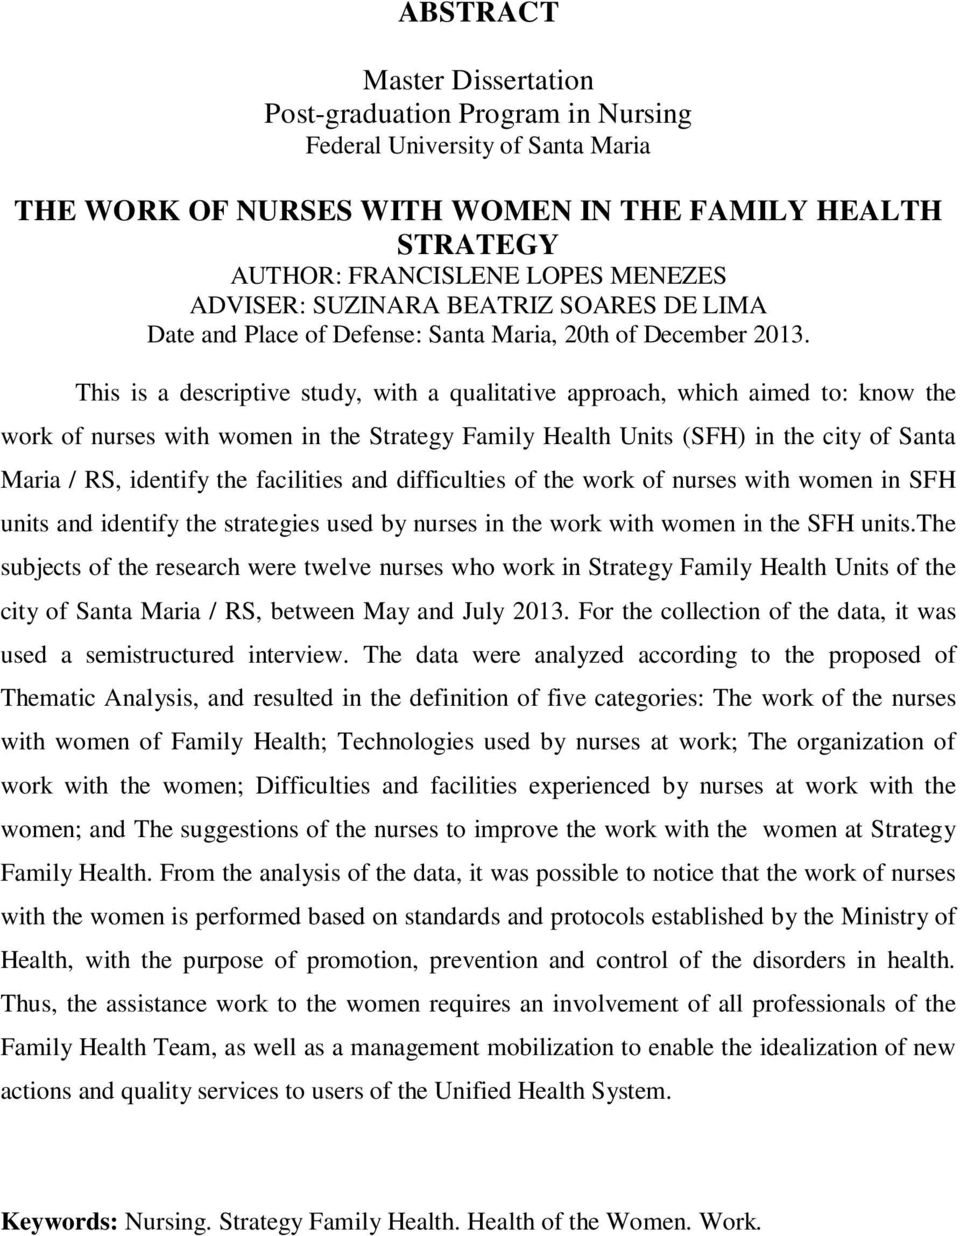 This is a descriptive study, with a qualitative approach, which aimed to: know the work of nurses with women in the Strategy Family Health Units (SFH) in the city of Santa Maria / RS, identify the